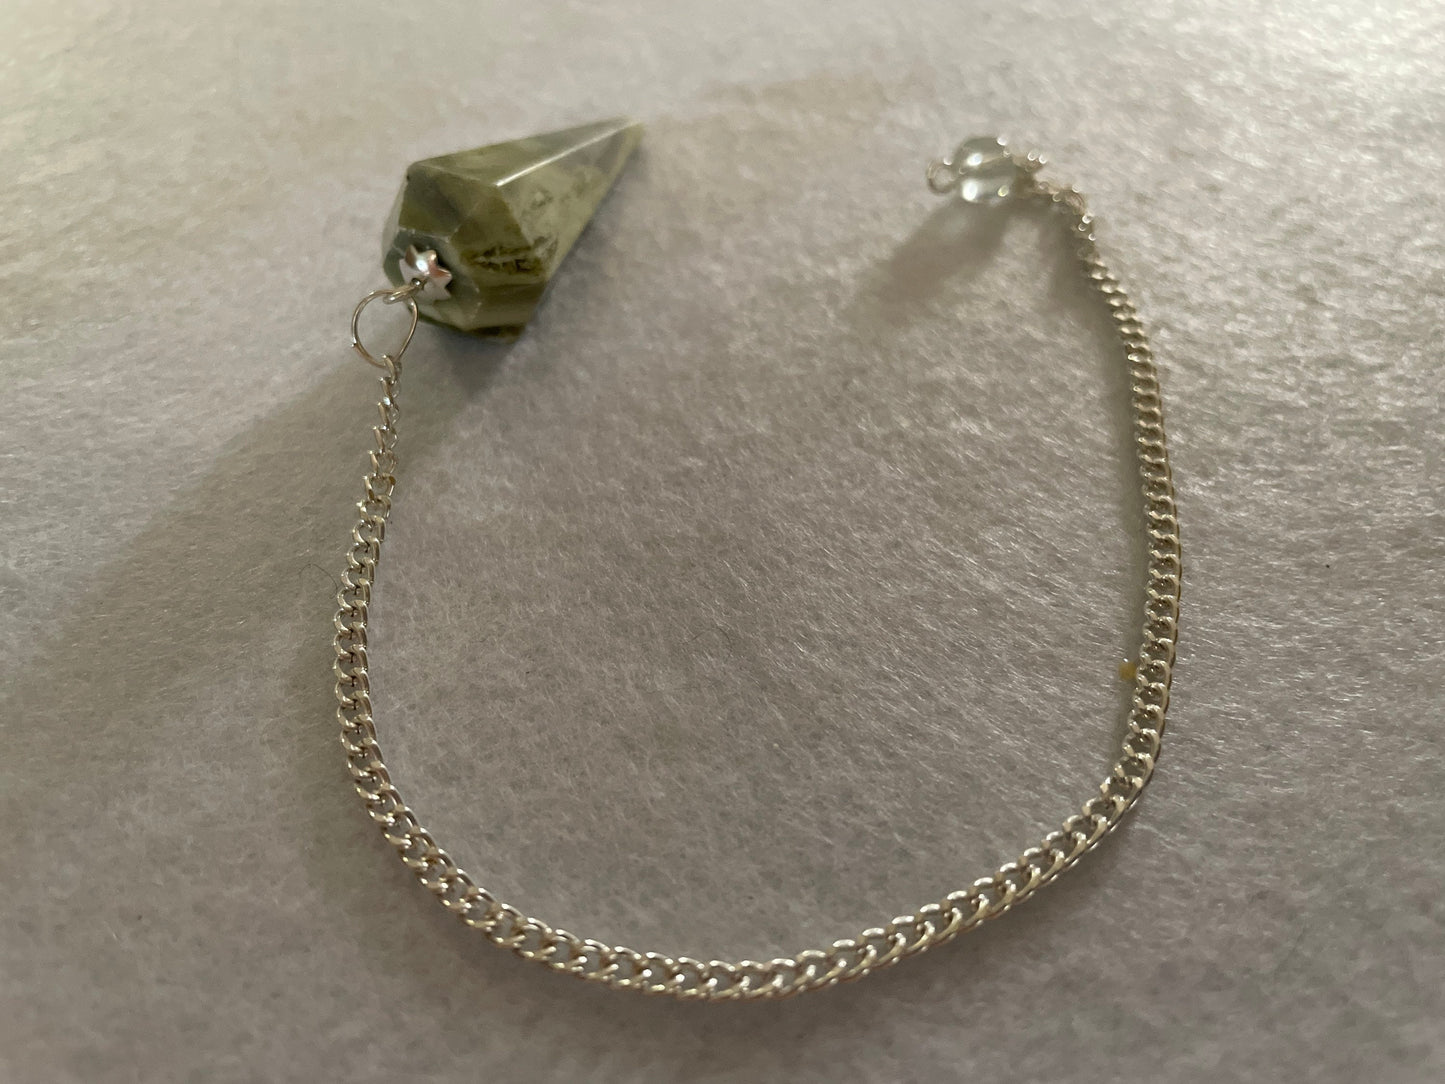 Awesome Serpentine Pendulum is  1.65” and with chain is 9.25”